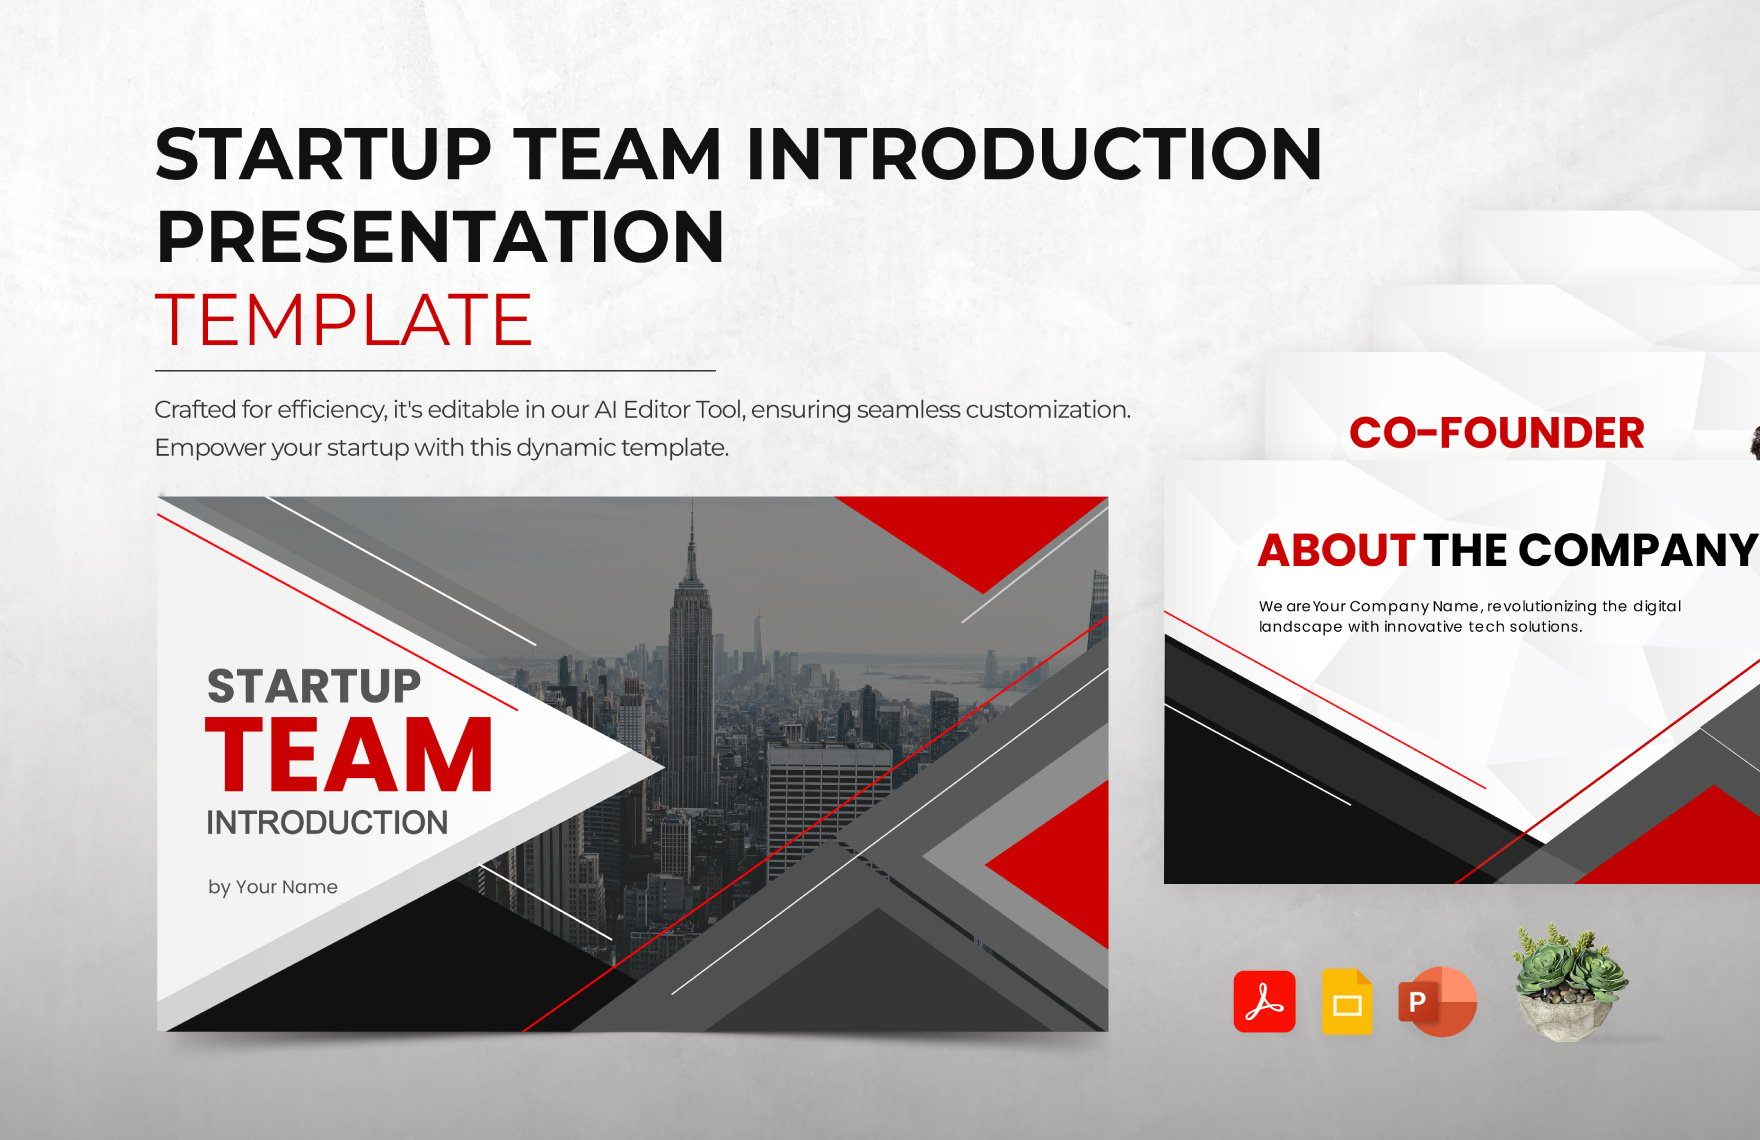 Free Startup Team Introduction Presentation Template in PDF, PowerPoint, Google Slides